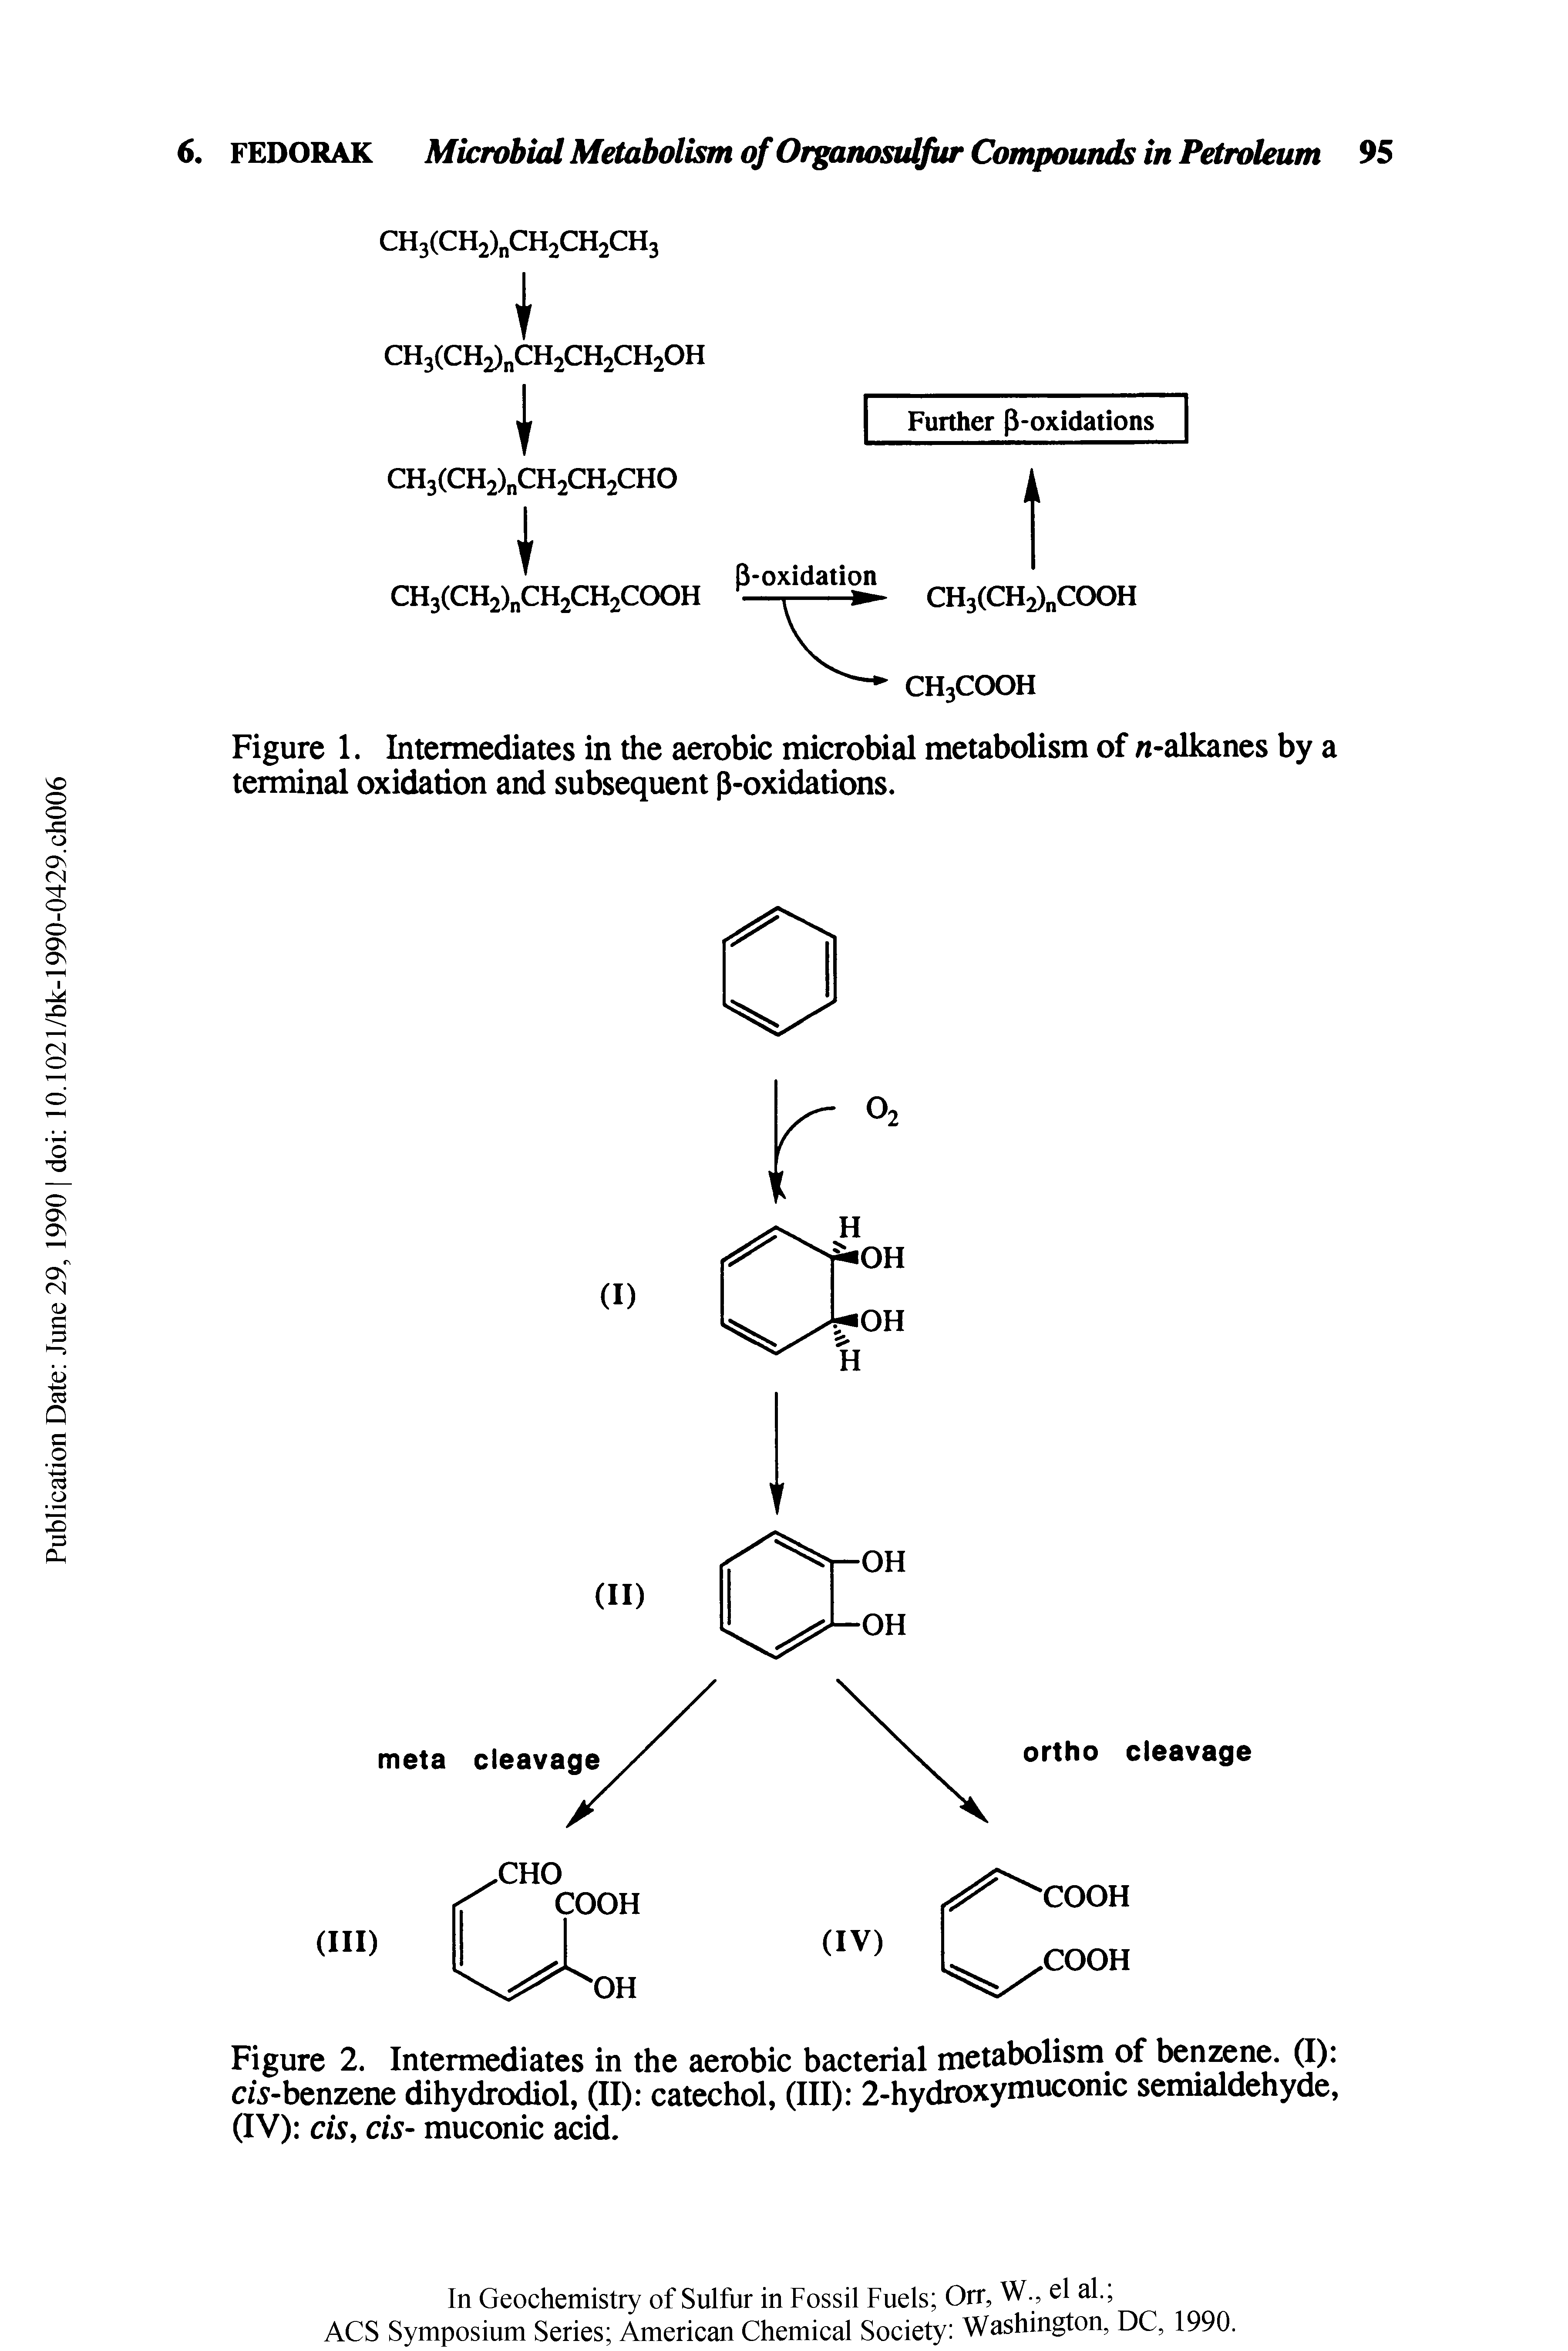 Figure 1. Intermediates in the aerobic microbial metabolism of n-alkanes by a terminal oxidation and subsequent p-oxidations.